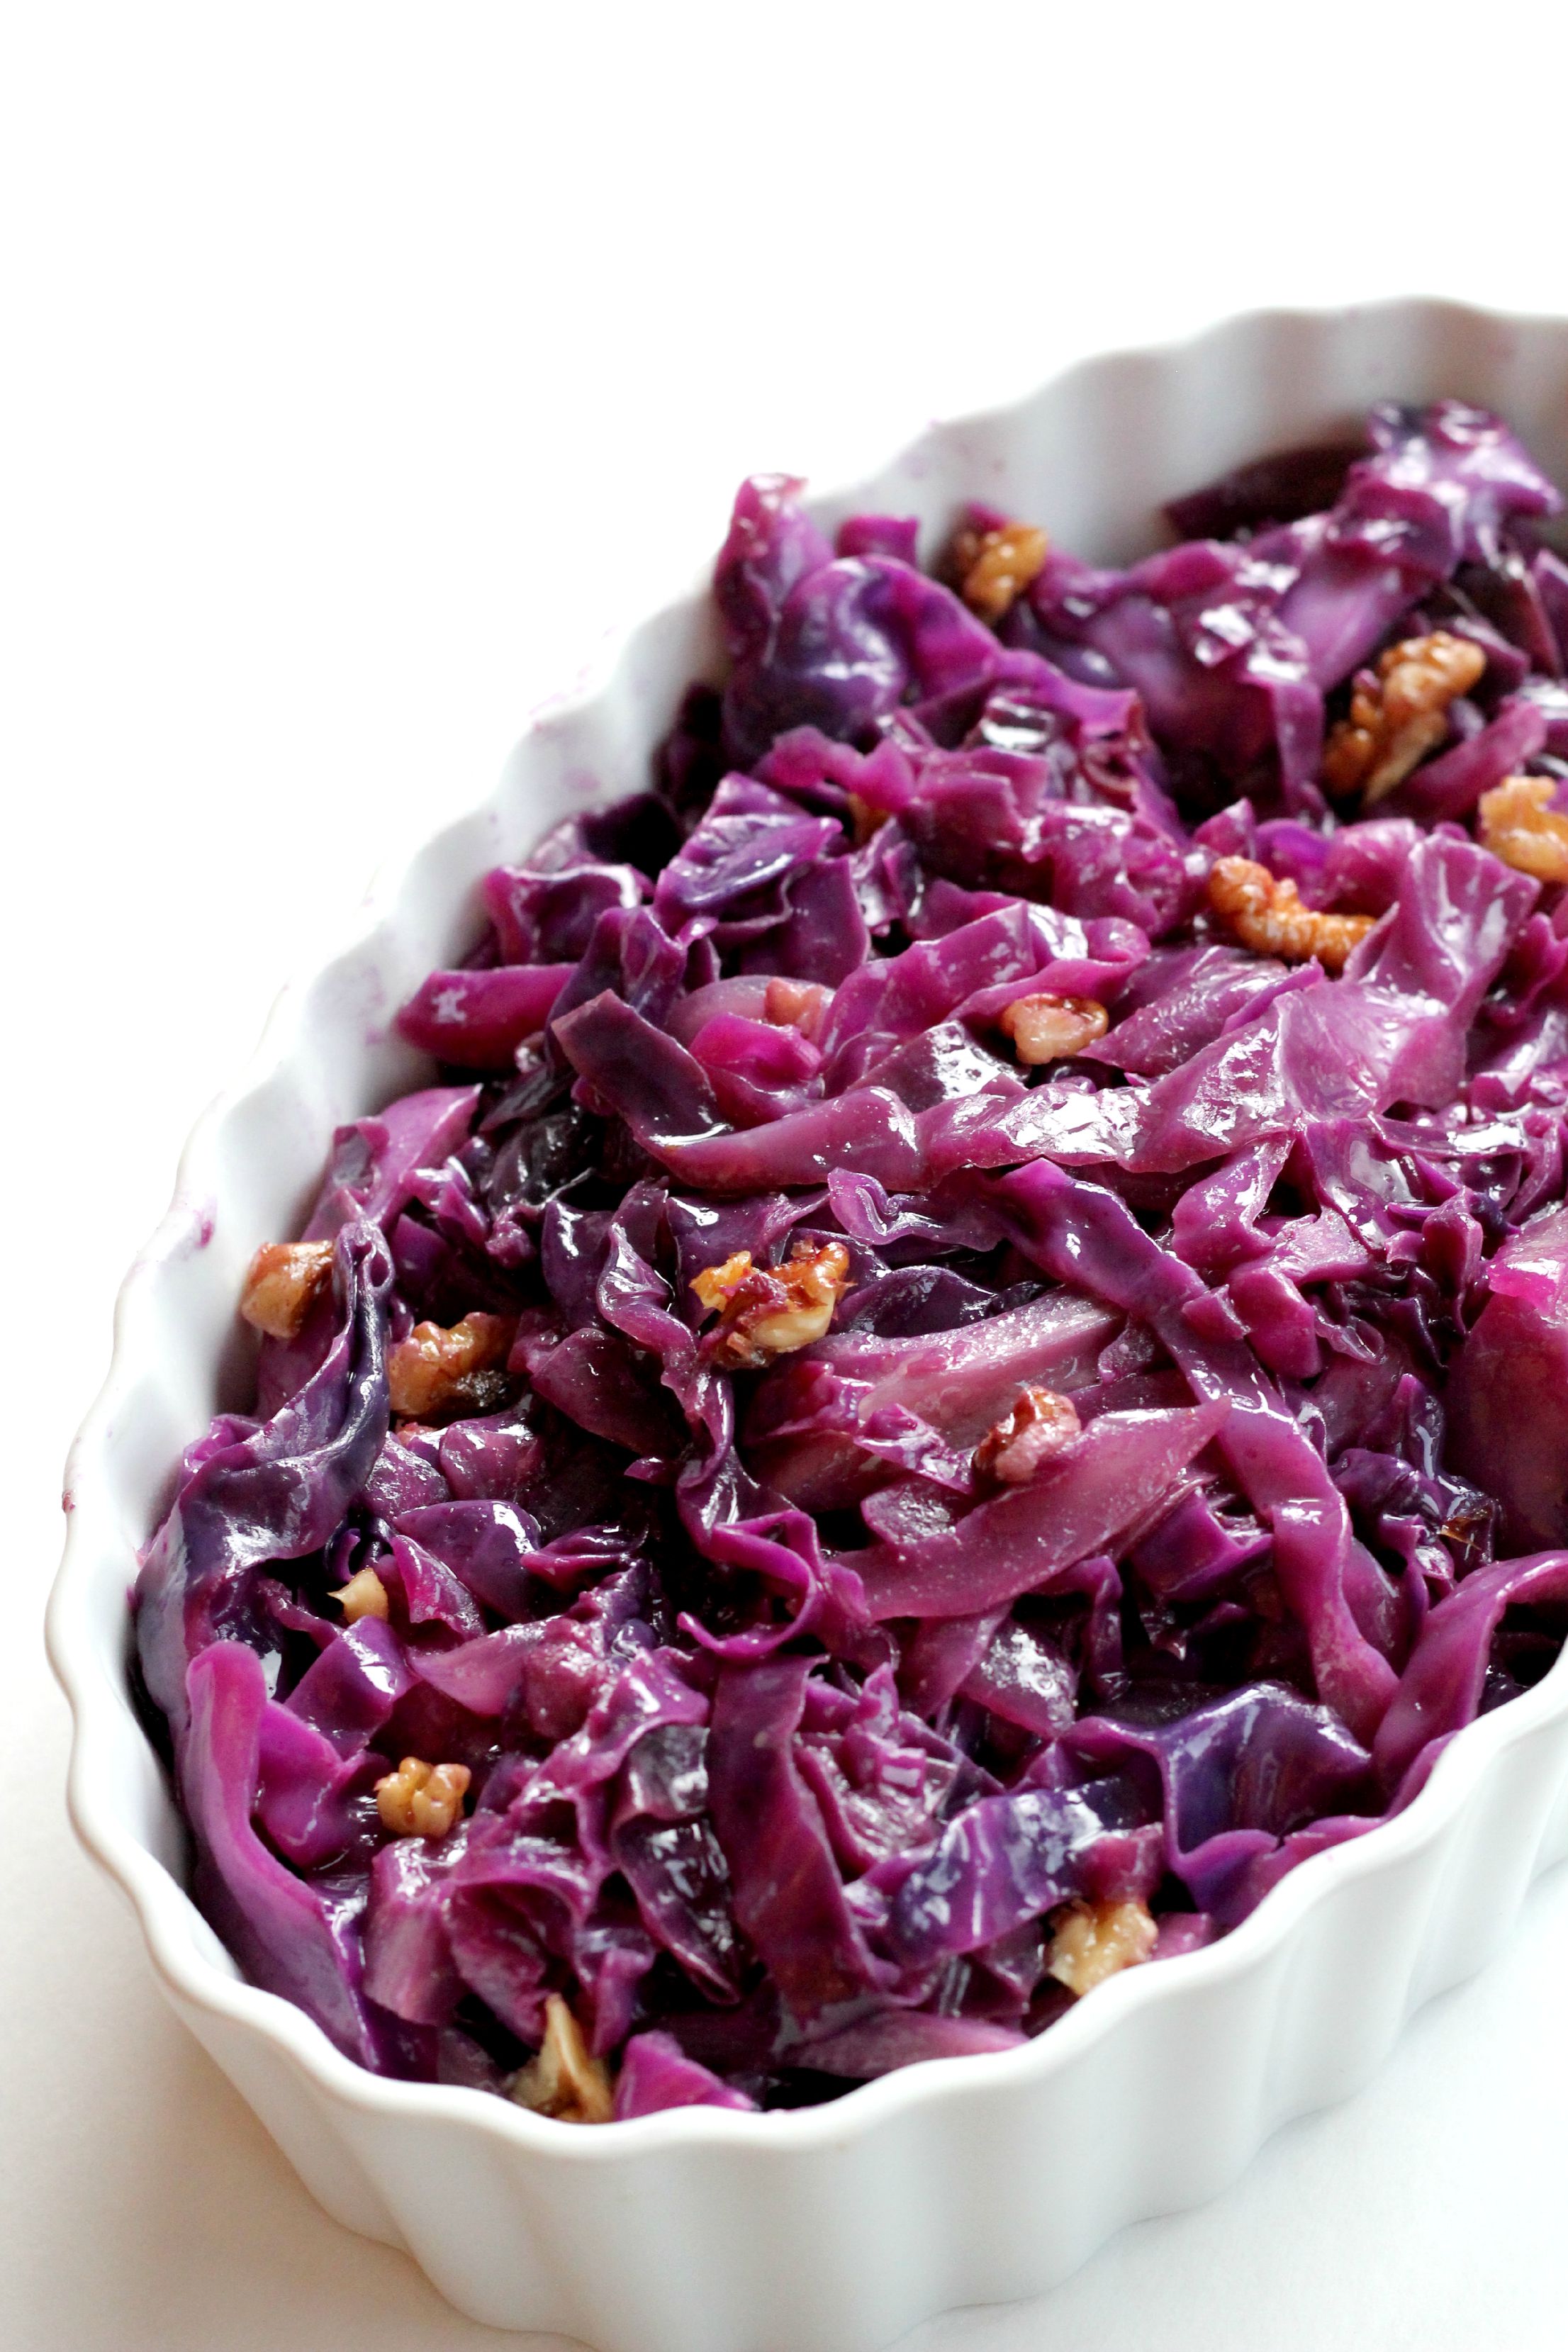 This Braised Red Cabbage with Walnuts has become my FAVORITE side dish. It goes with everything I make and it's Paleo and Vegan! 